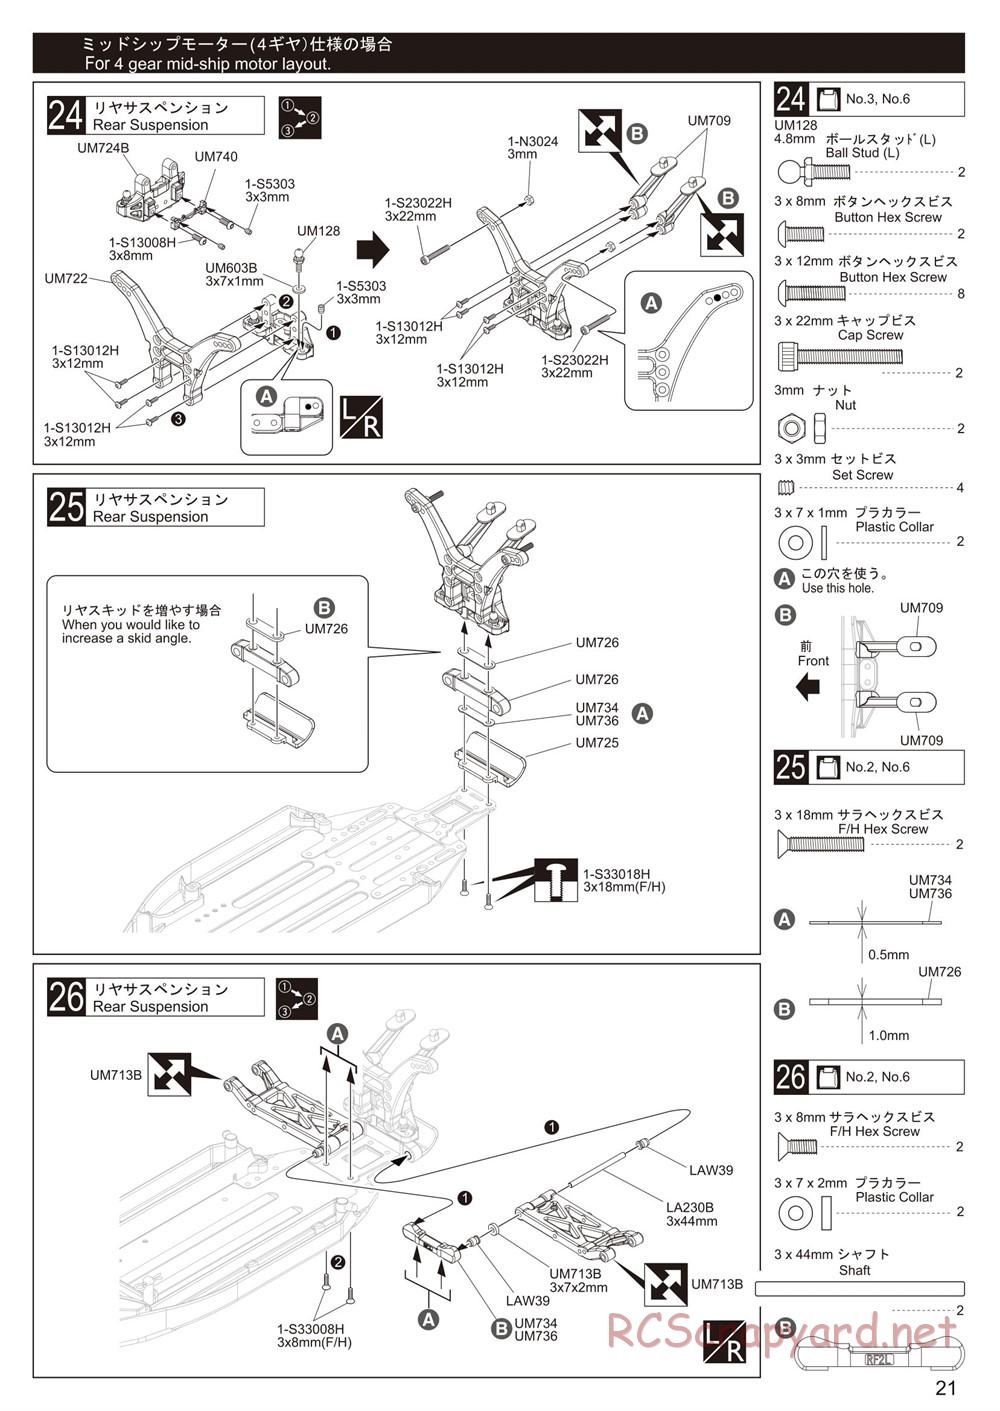 Kyosho - Ultima RB6.6 - Manual - Page 21